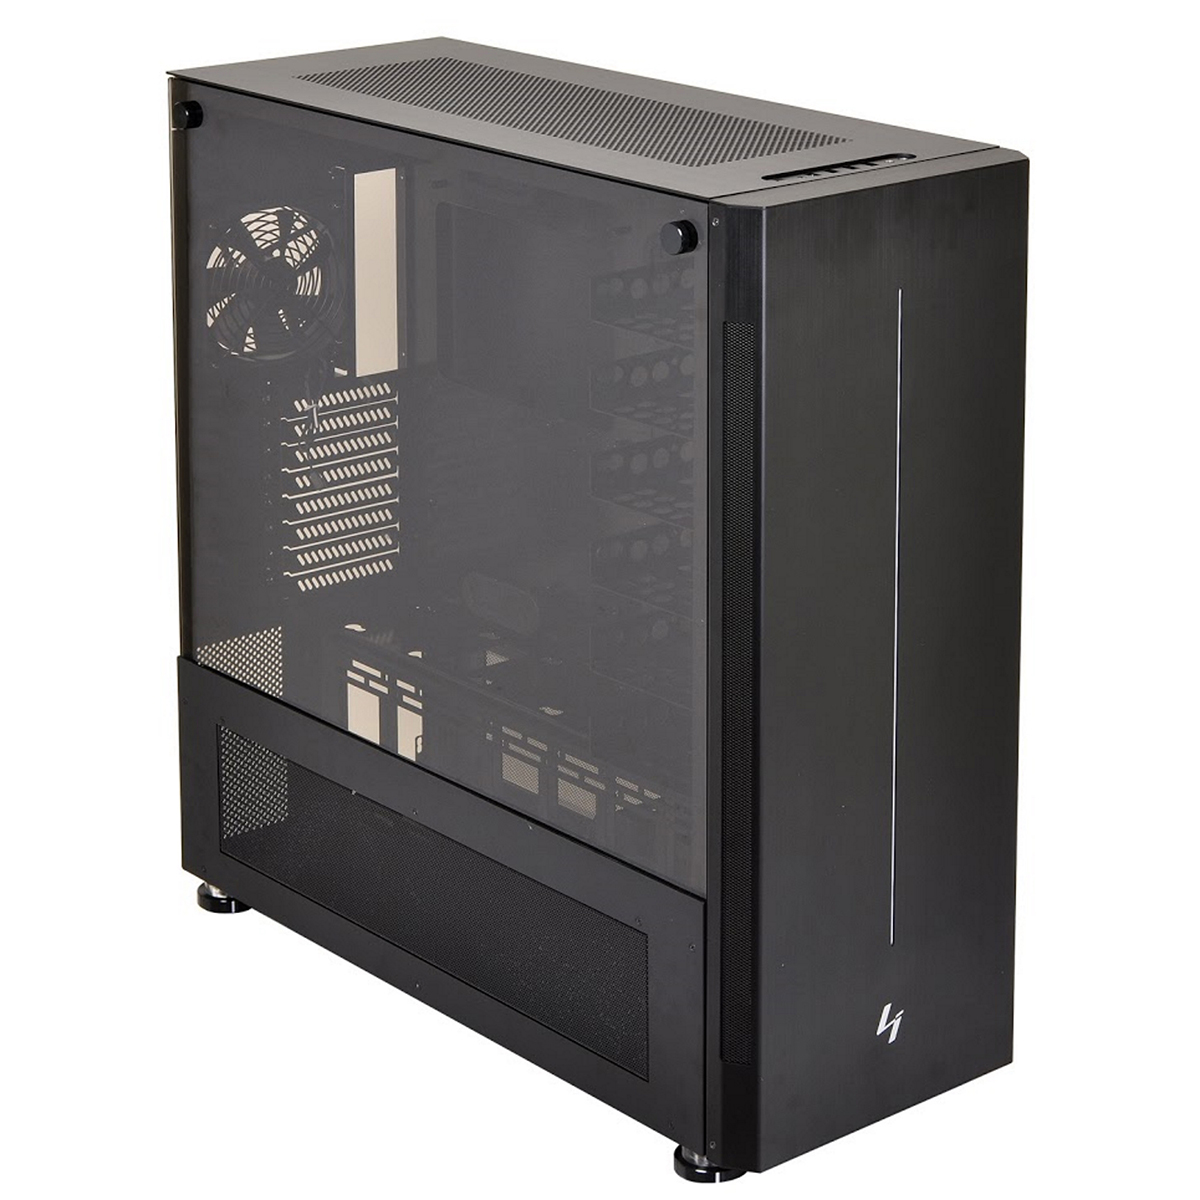 Lian Li V3000 Full Tower computer case with glass side panel